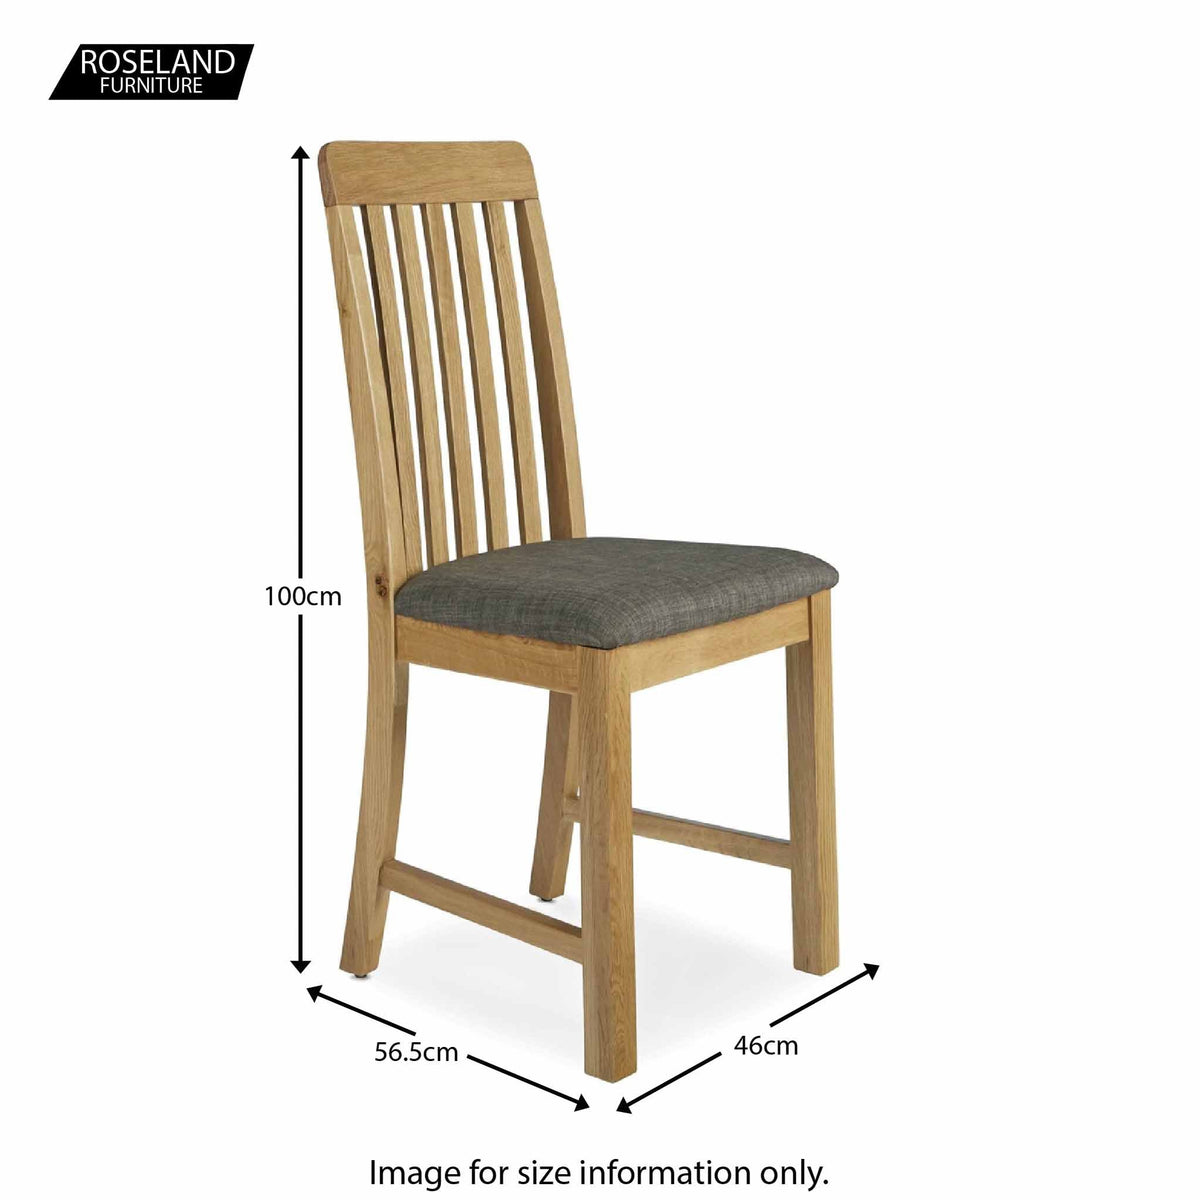 Alba Oak Slatted Dining Chair - Size Guide